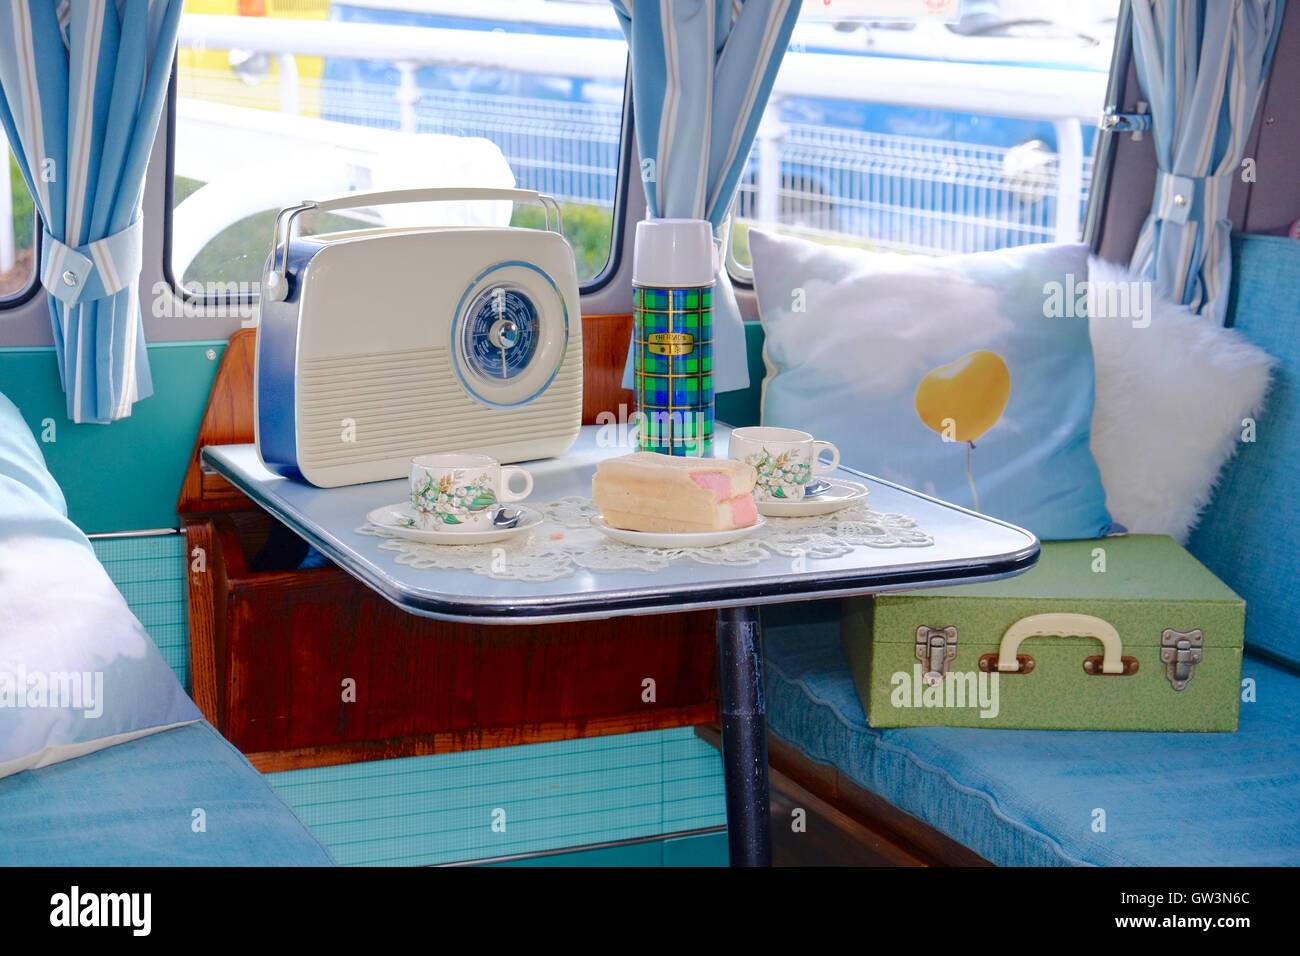 VW Camper van interior, with table set for afternoon tea, with batten-burg cake, thermos flask and retro radio. Stock Photo